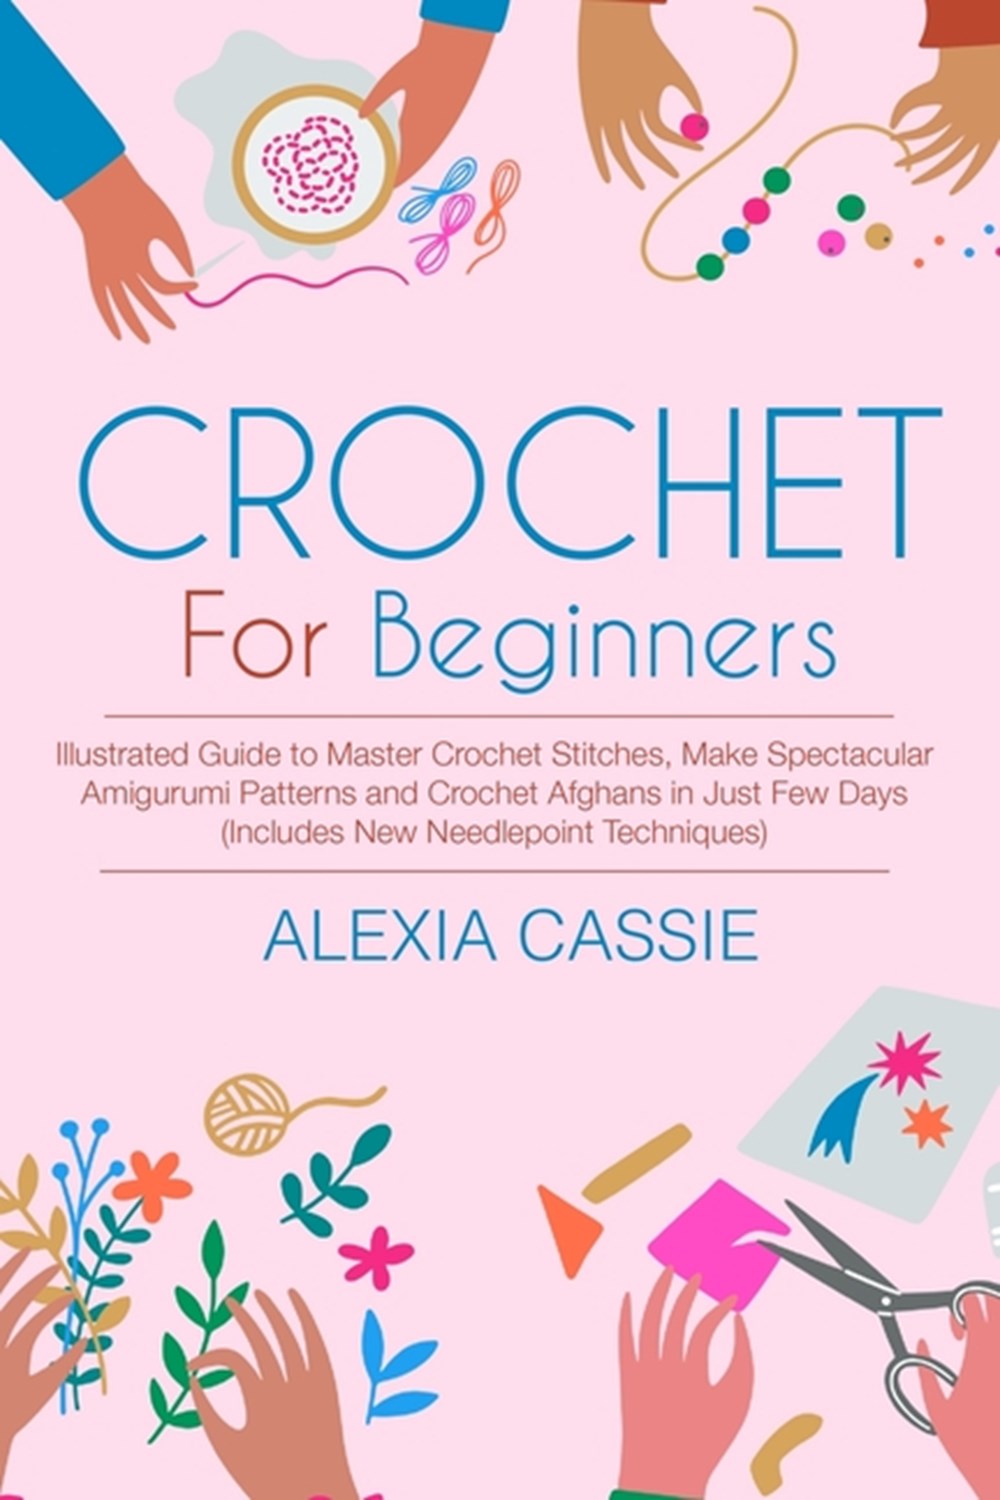 Crochet for Beginners: Illustrated Guide to Master Crochet Stitches, Make Spectacular Amigurumi Patt